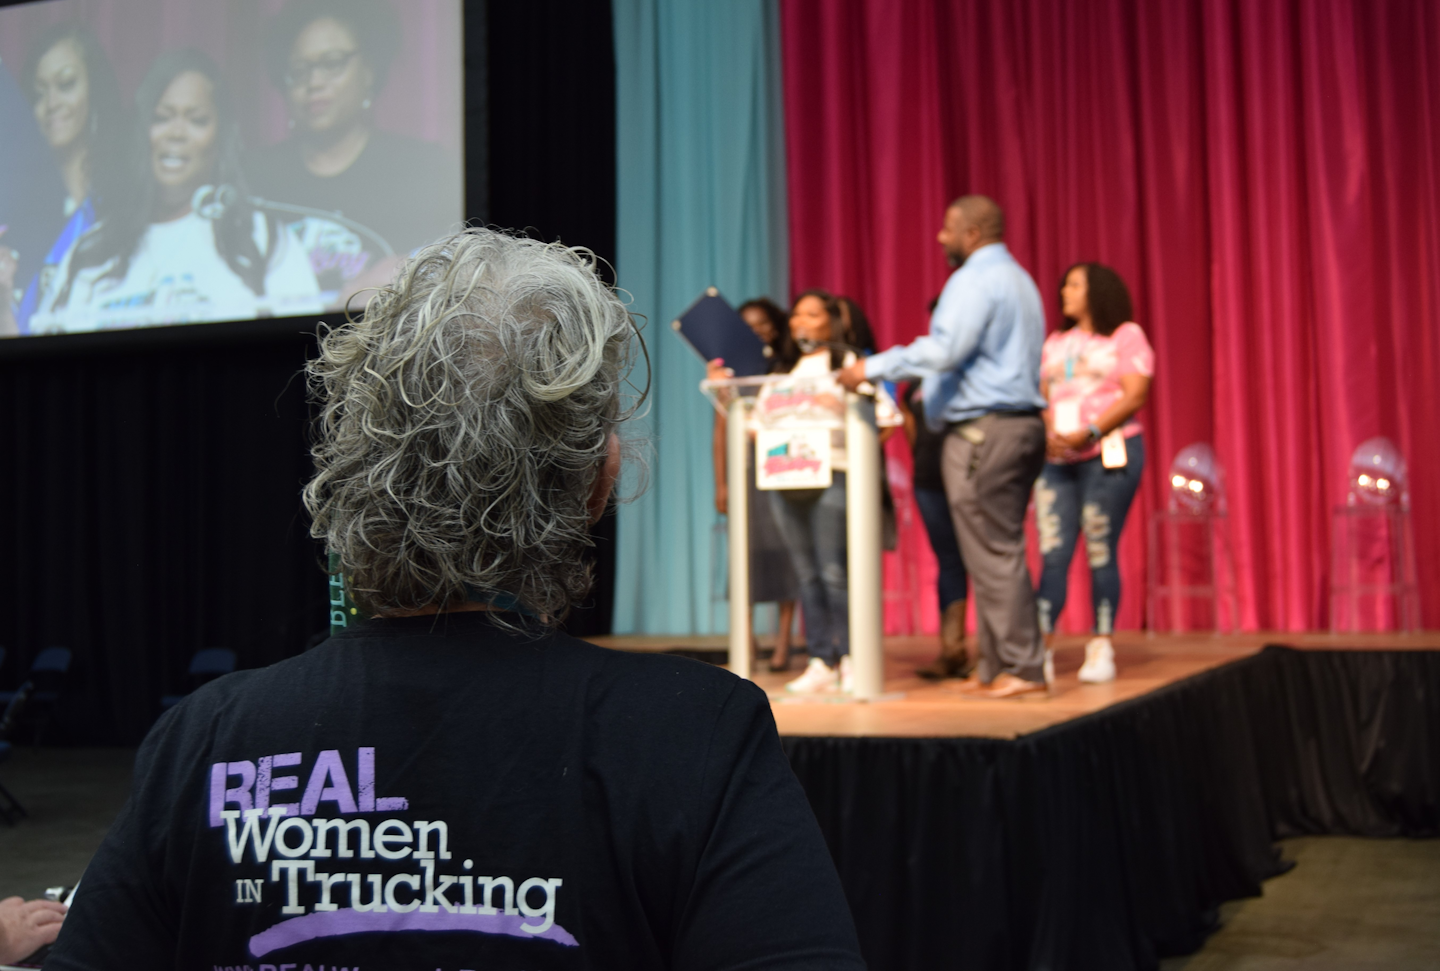 Idella Hansen here looks on near the beginning of the program as Sharae Moore welcomed attendees. Hansen was among several representatives on hand with Real Women in Trucking, whom Moore thanked during her opening remarks.